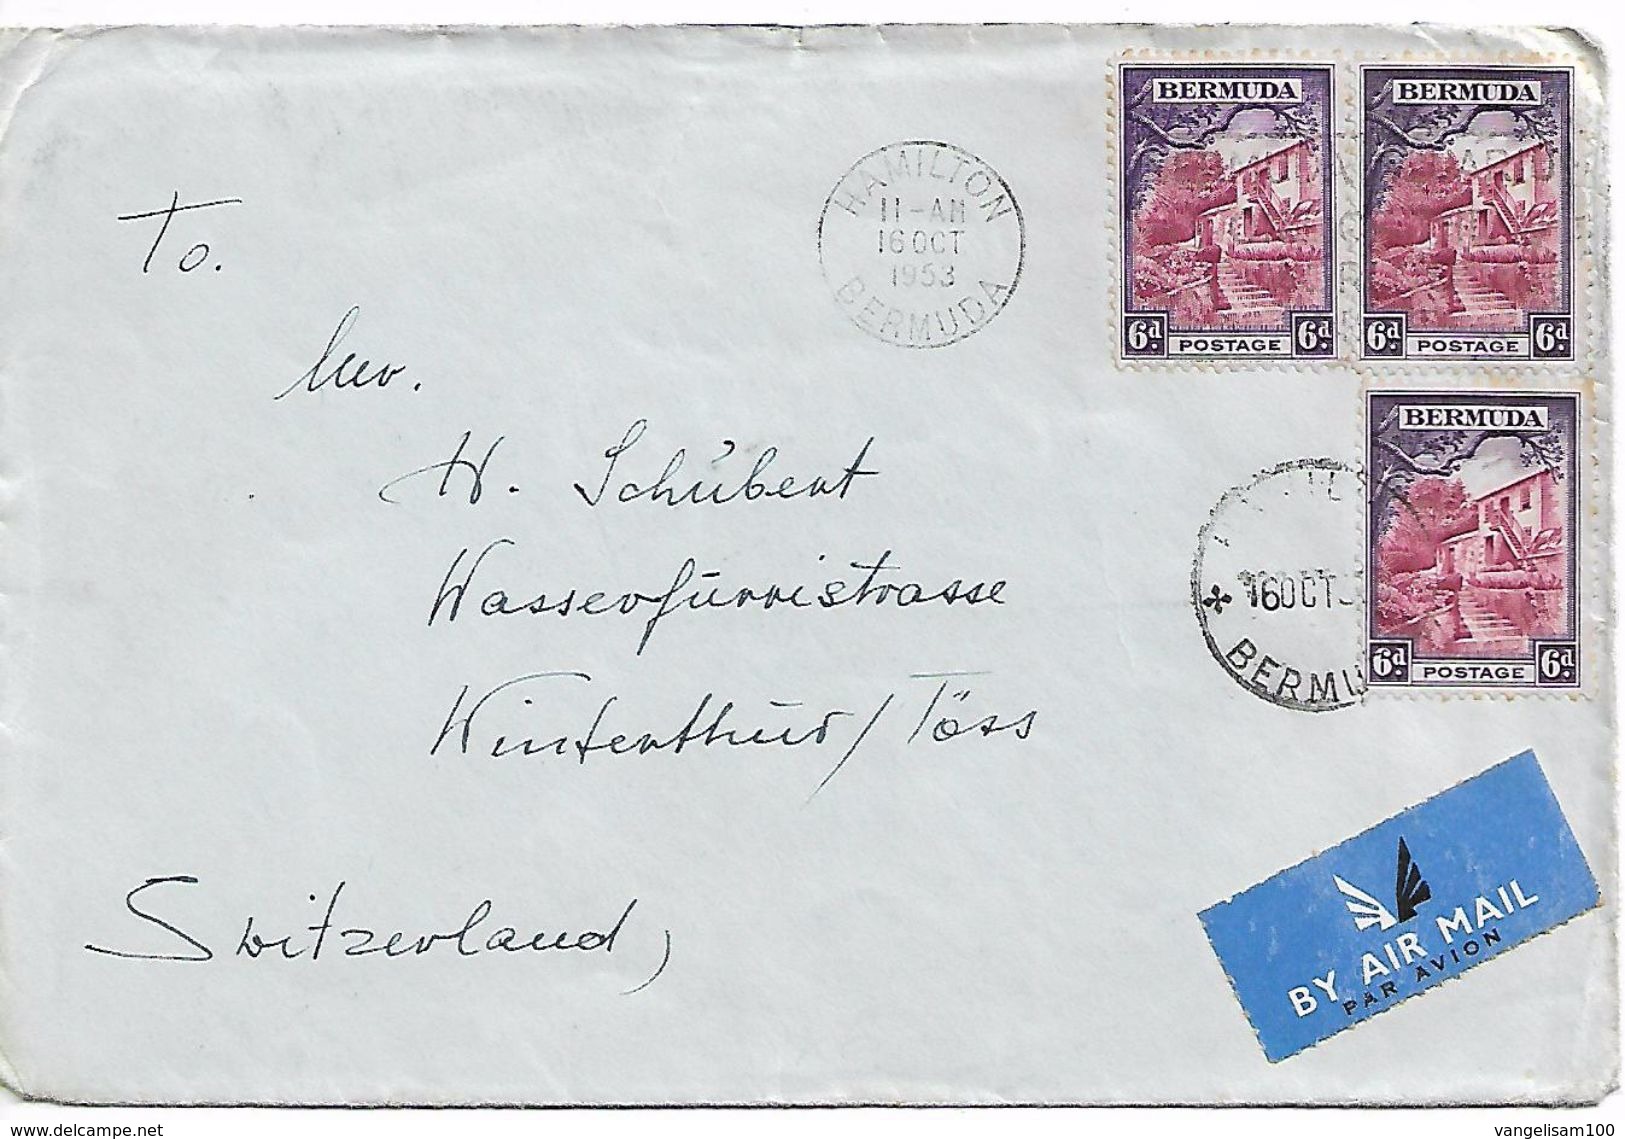 BERMUDA 1953 Cover Sent To Switzerland With 3 Stamps COVER USED - Bermuda